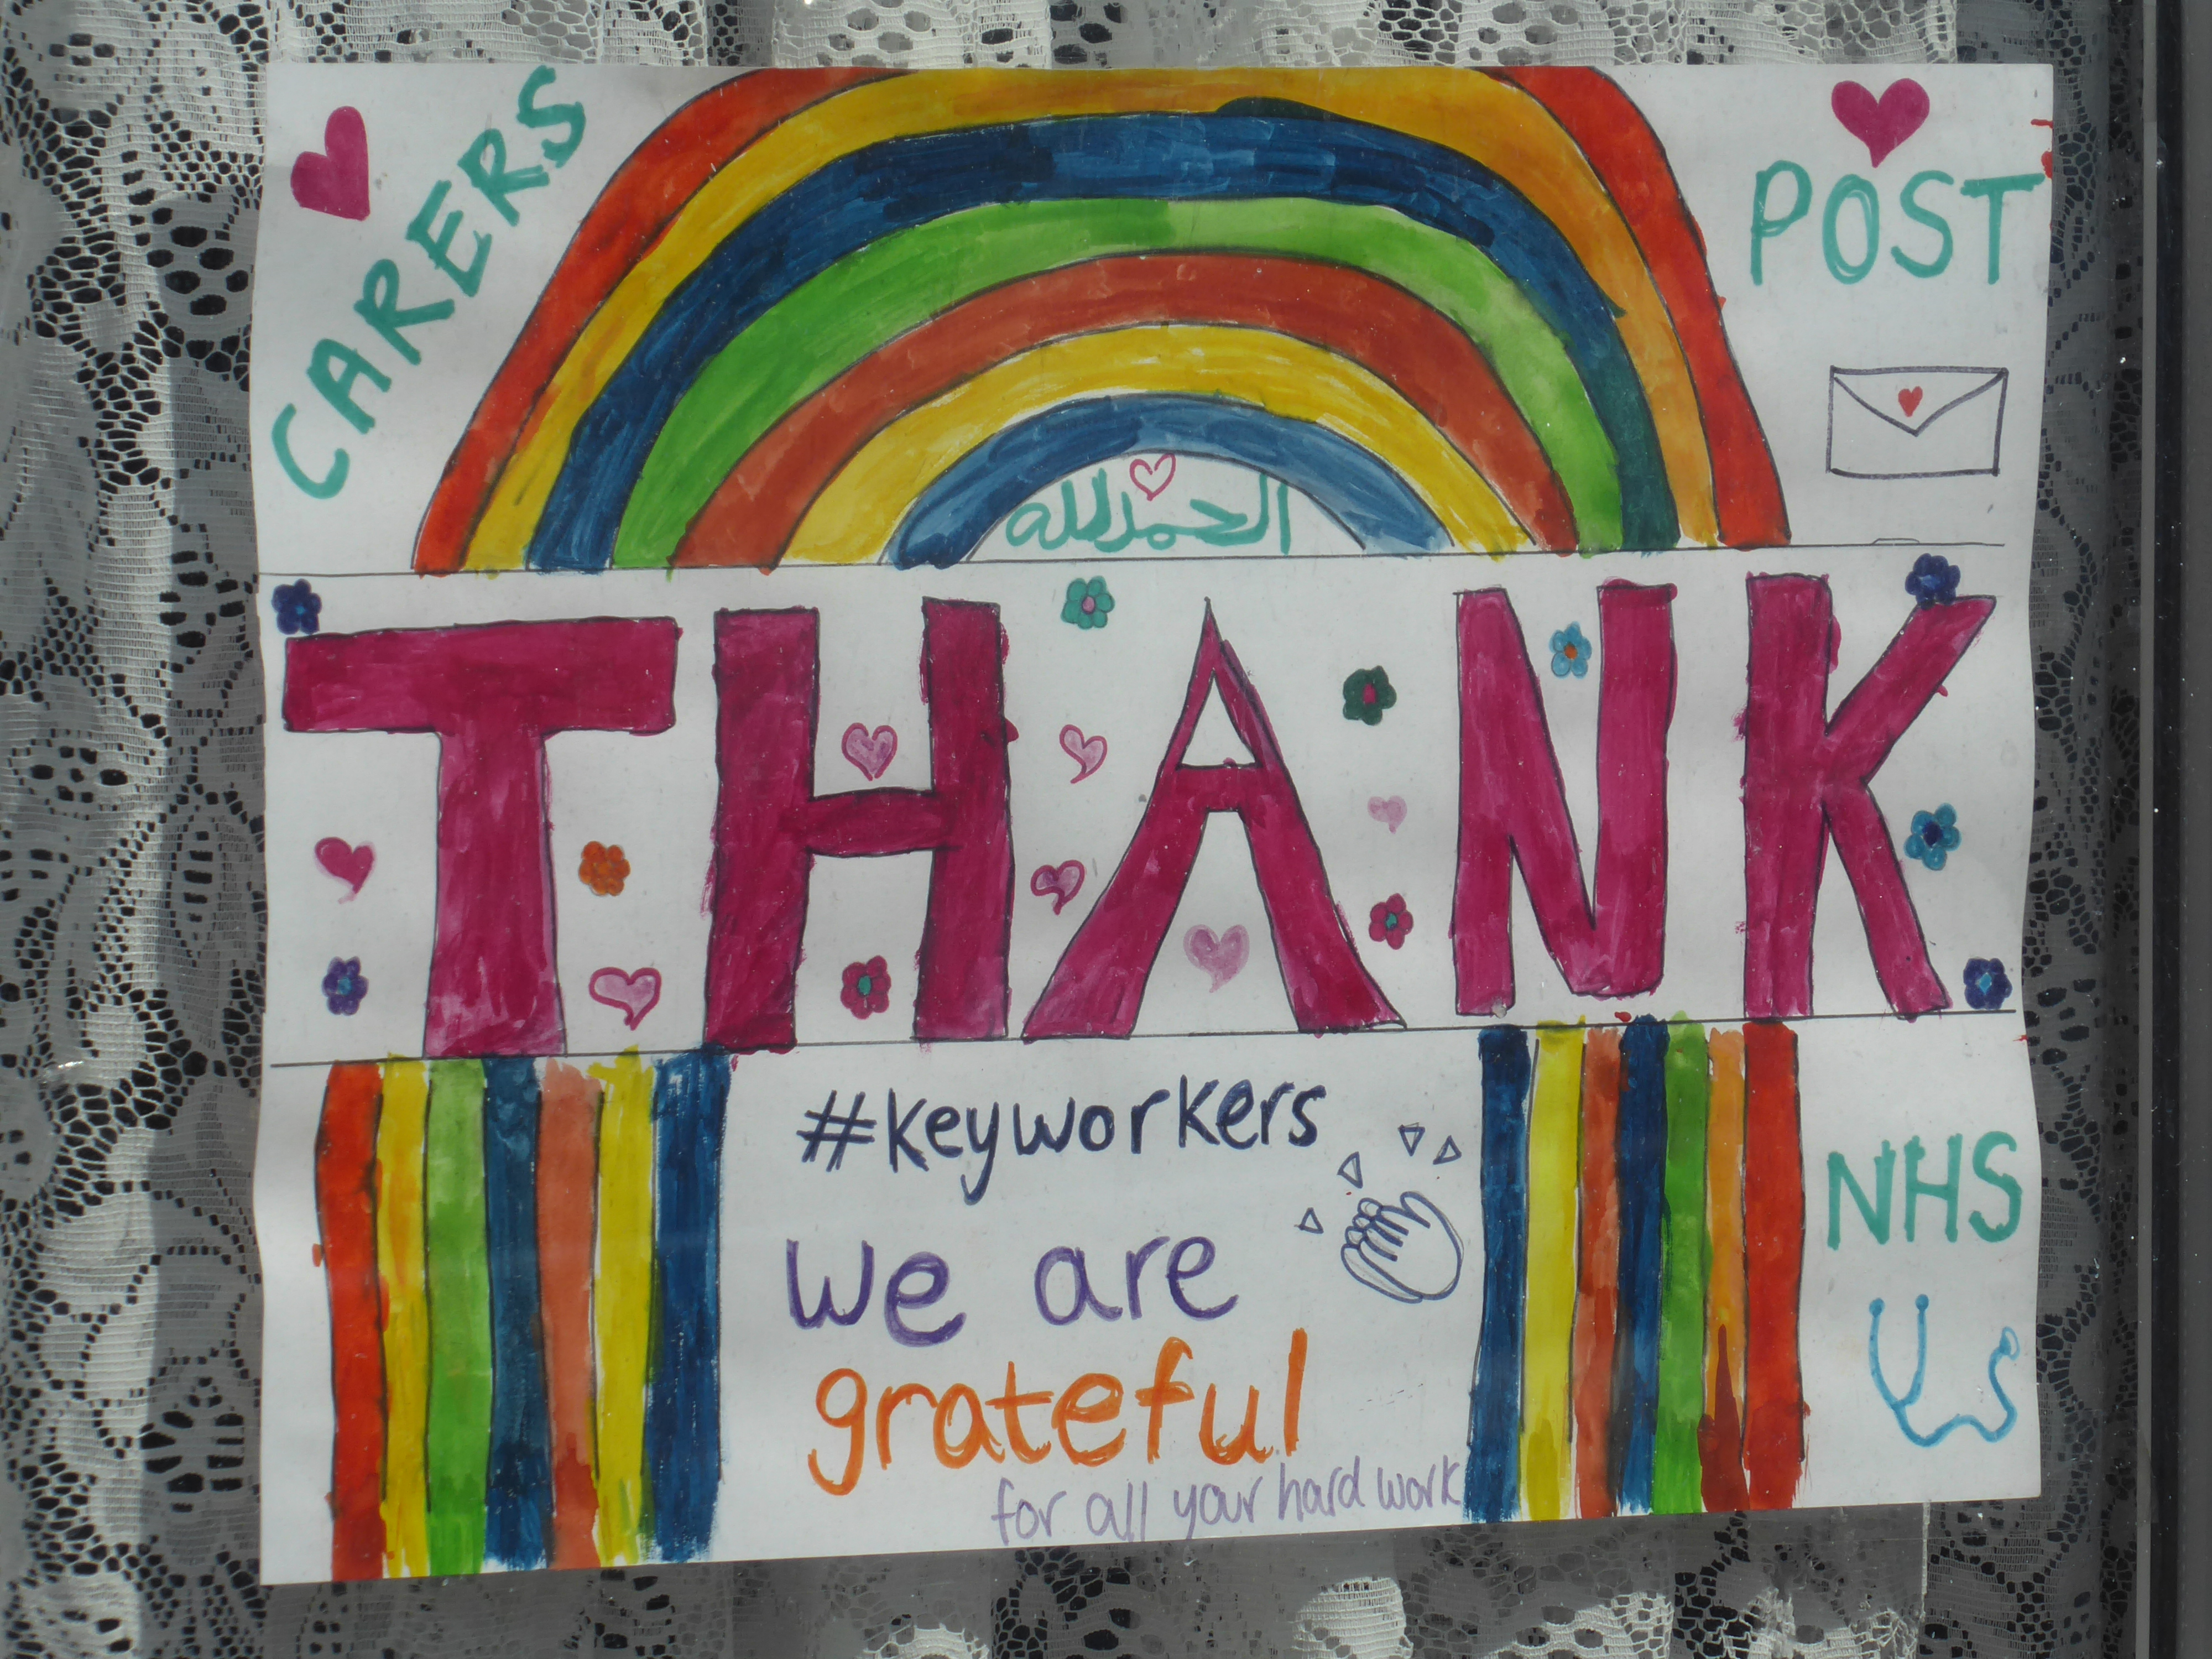 Hand-drawn rainbow on a piece of white paper on display in a house window. The sign is inscribed: 'THANK YOU KEY WORKERS We are grateful for all your hard work'.